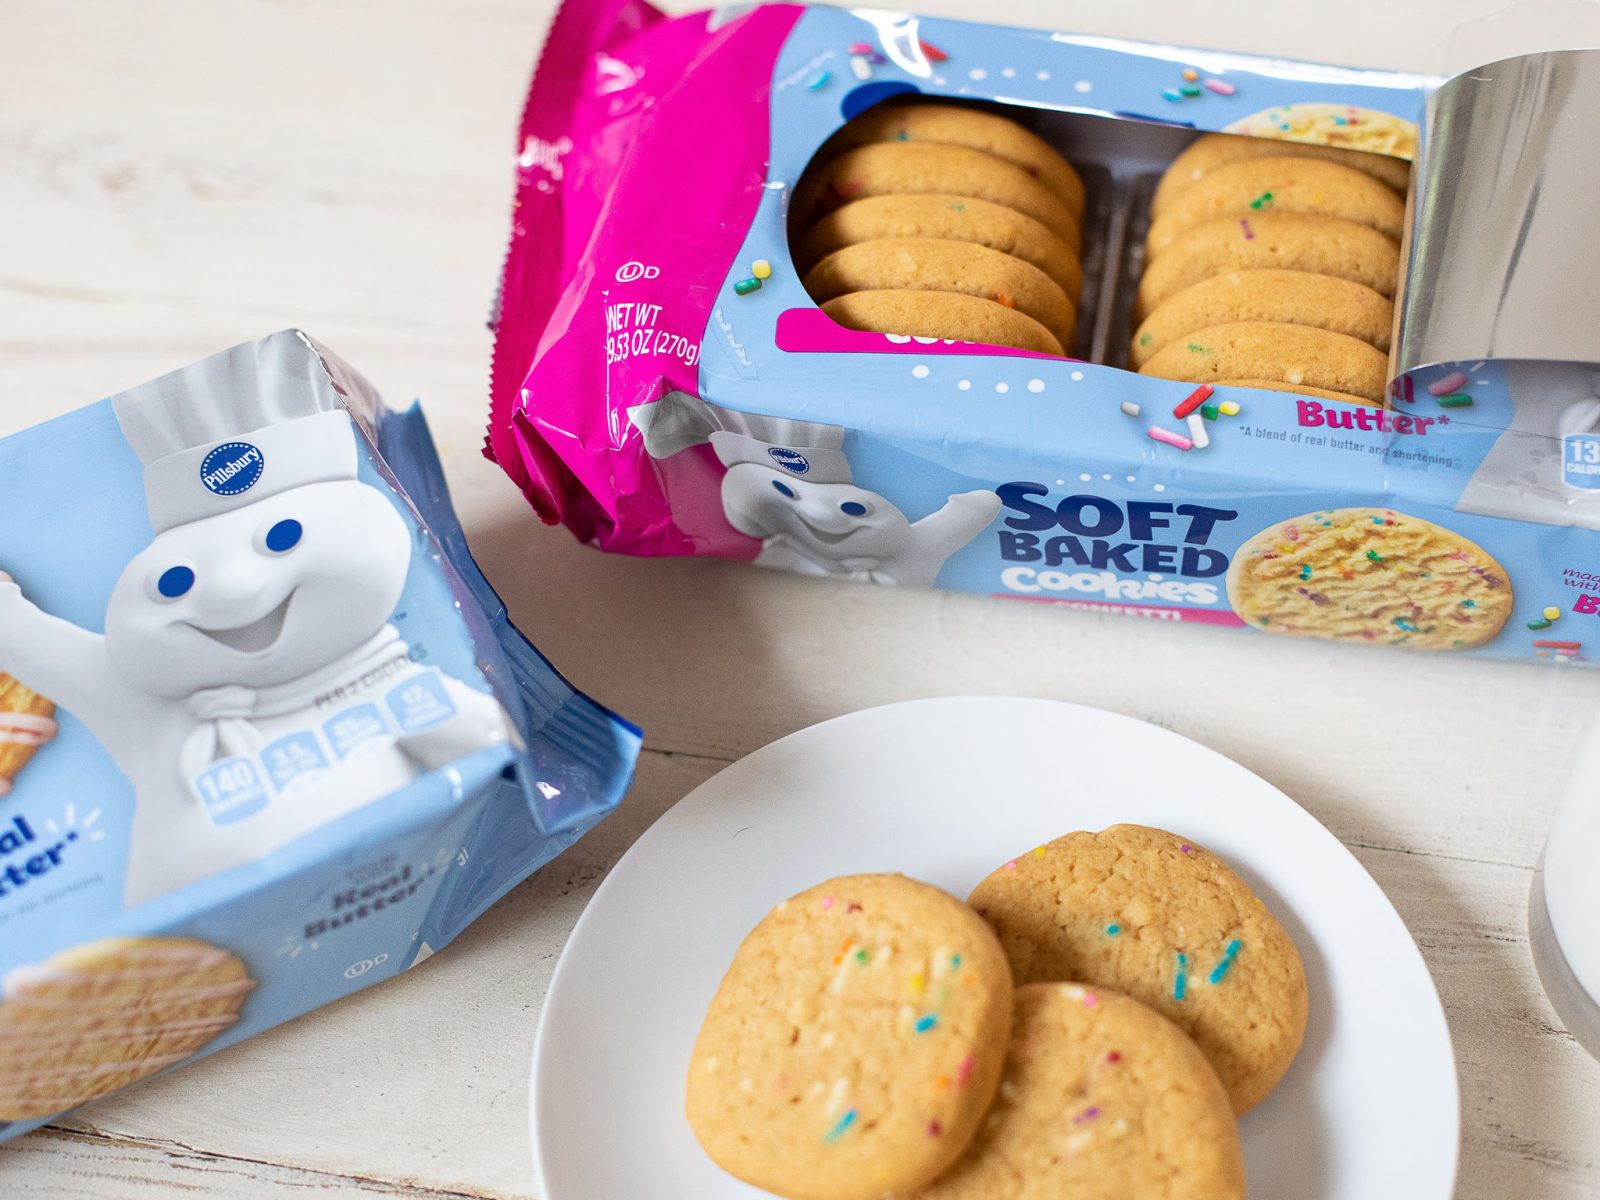 Pillsbury Soft Baked Cookies As Low As 90¢ At Publix